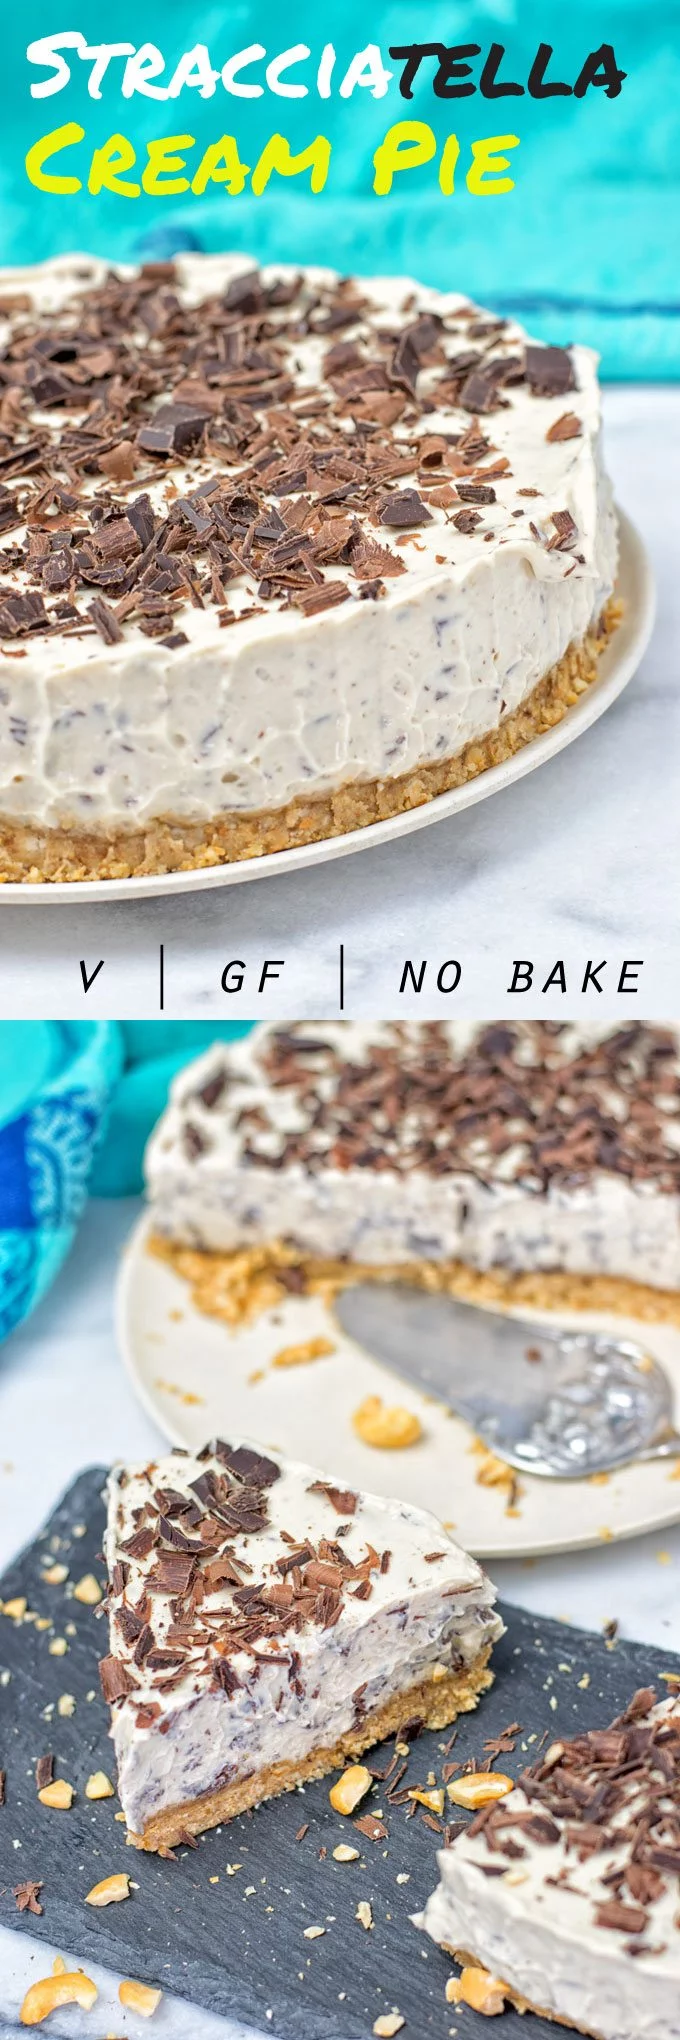 Collage of two pictures of the Stracciatella Cream Pie with recipe title text.